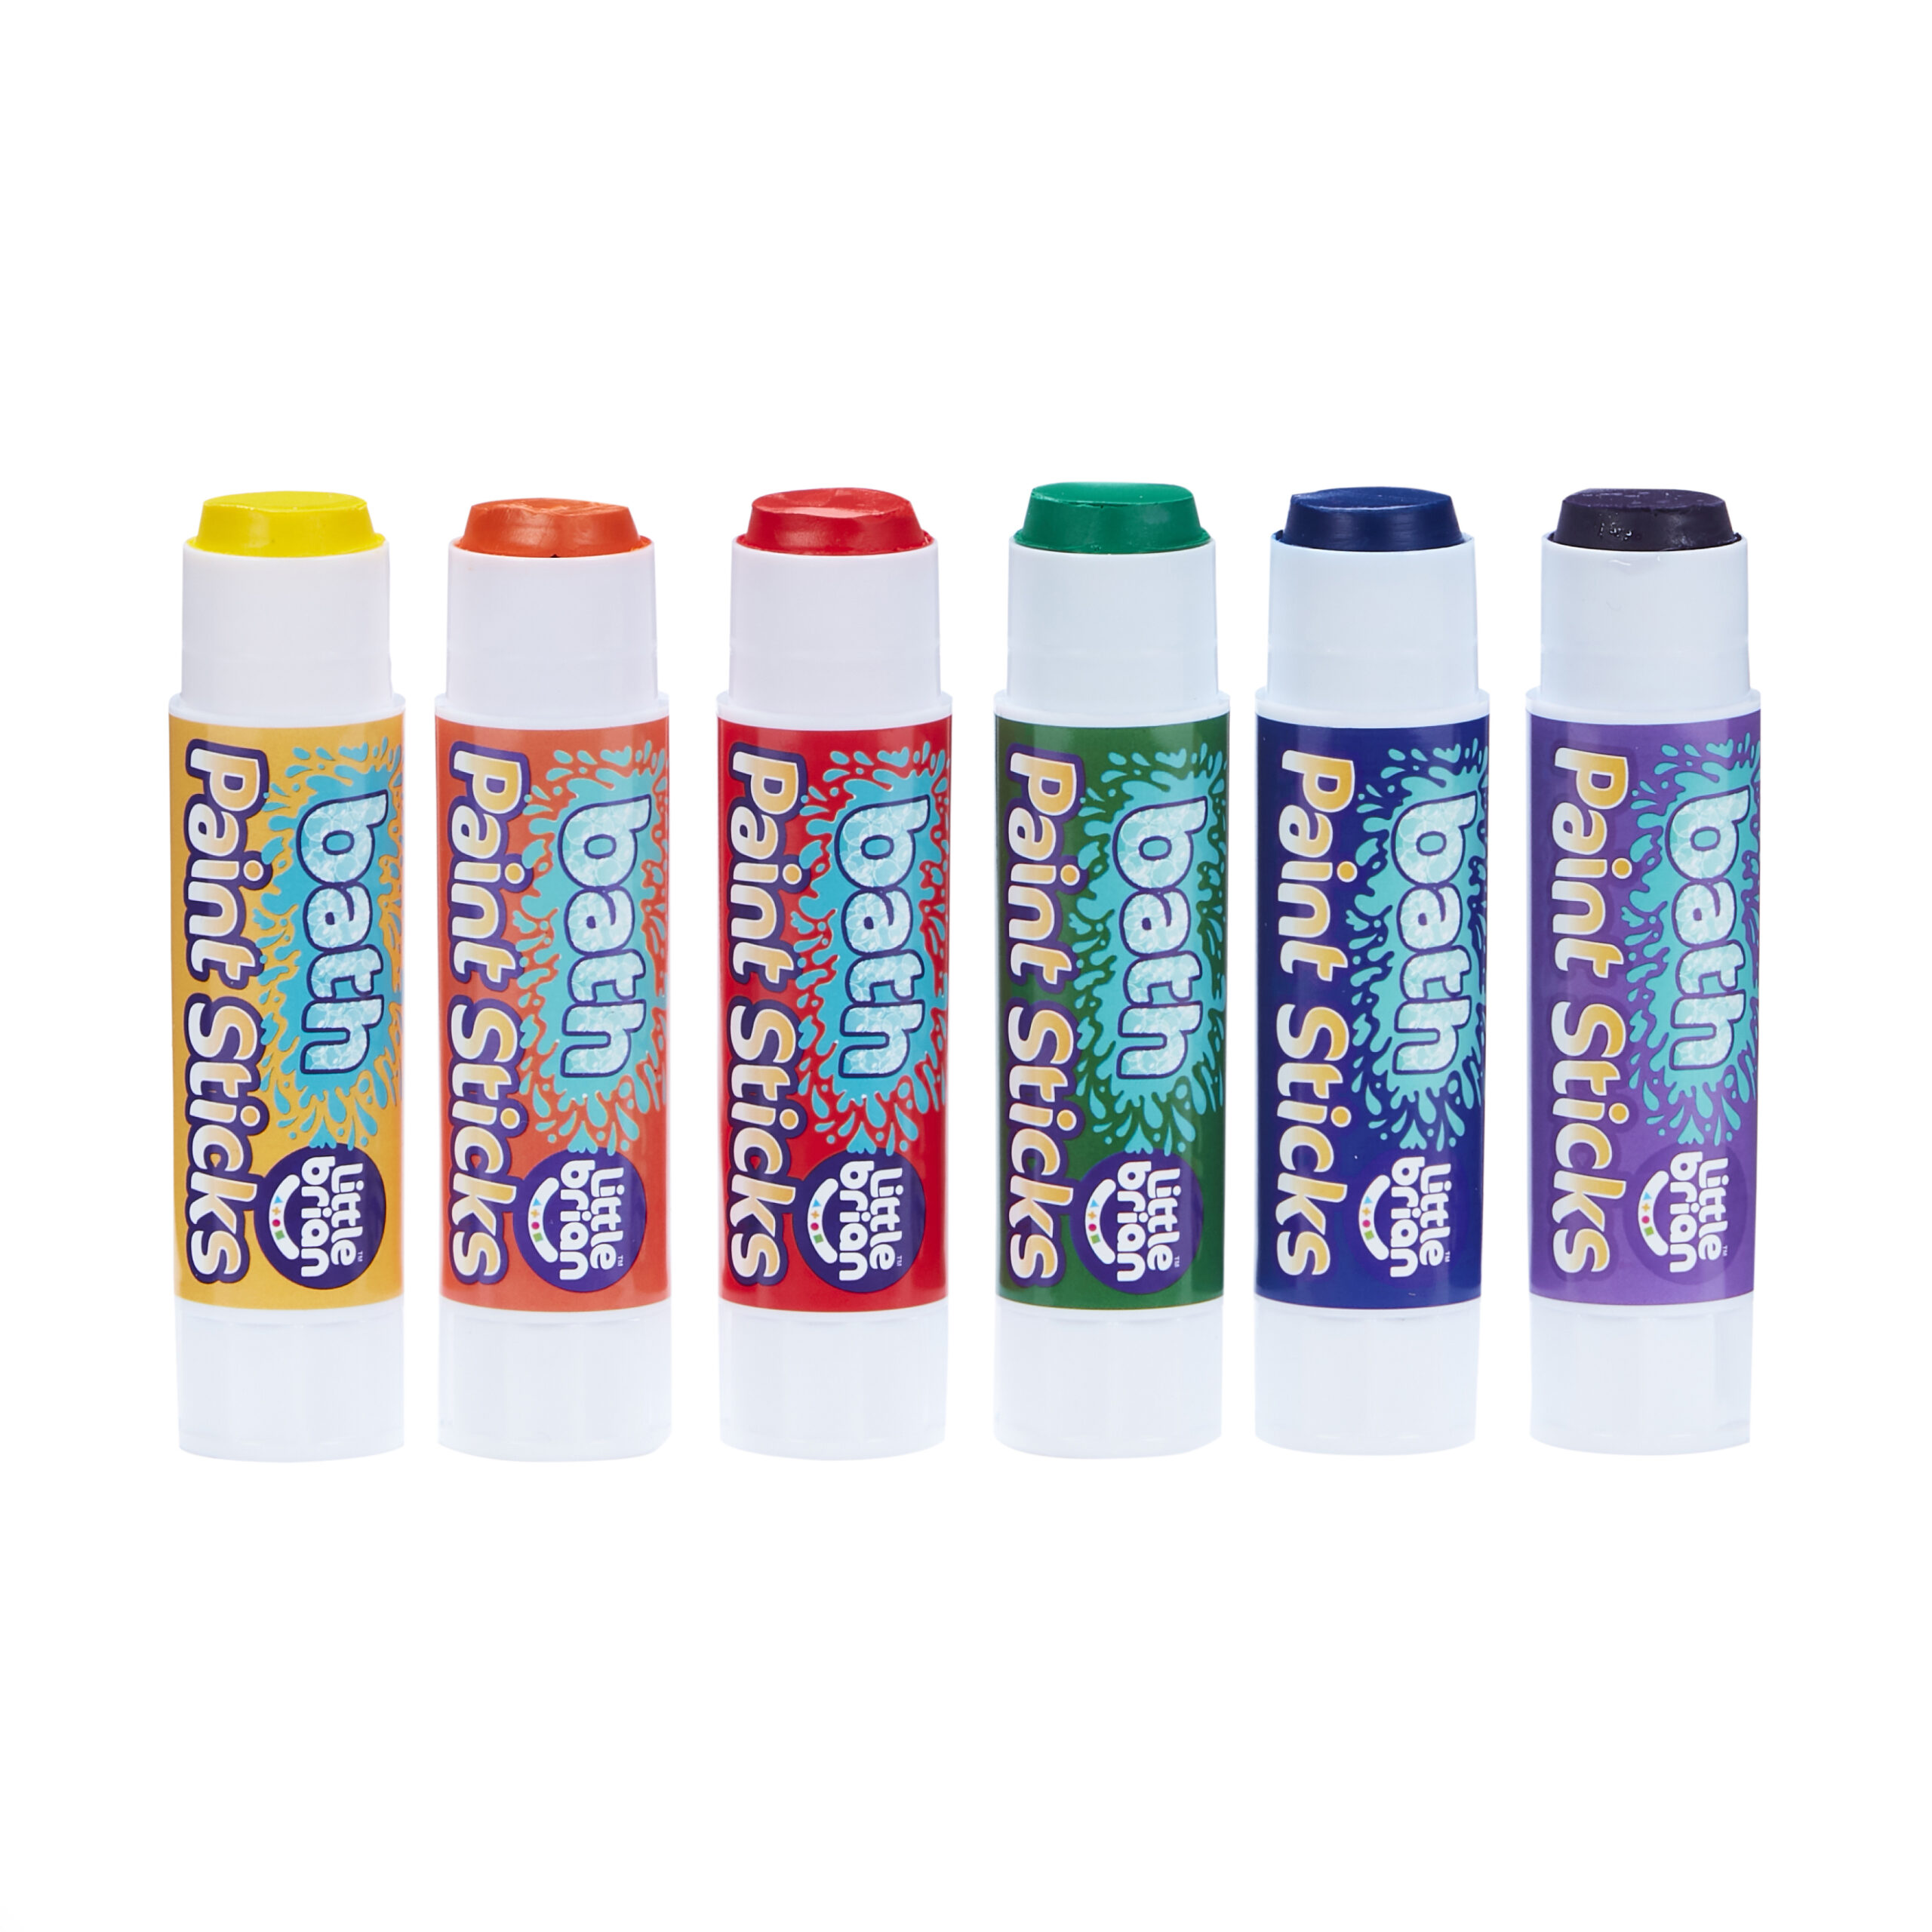 Tubbies Bath Paint Sticks - Set of 6  Bath and shower time will never be  boring again - My Creative Box